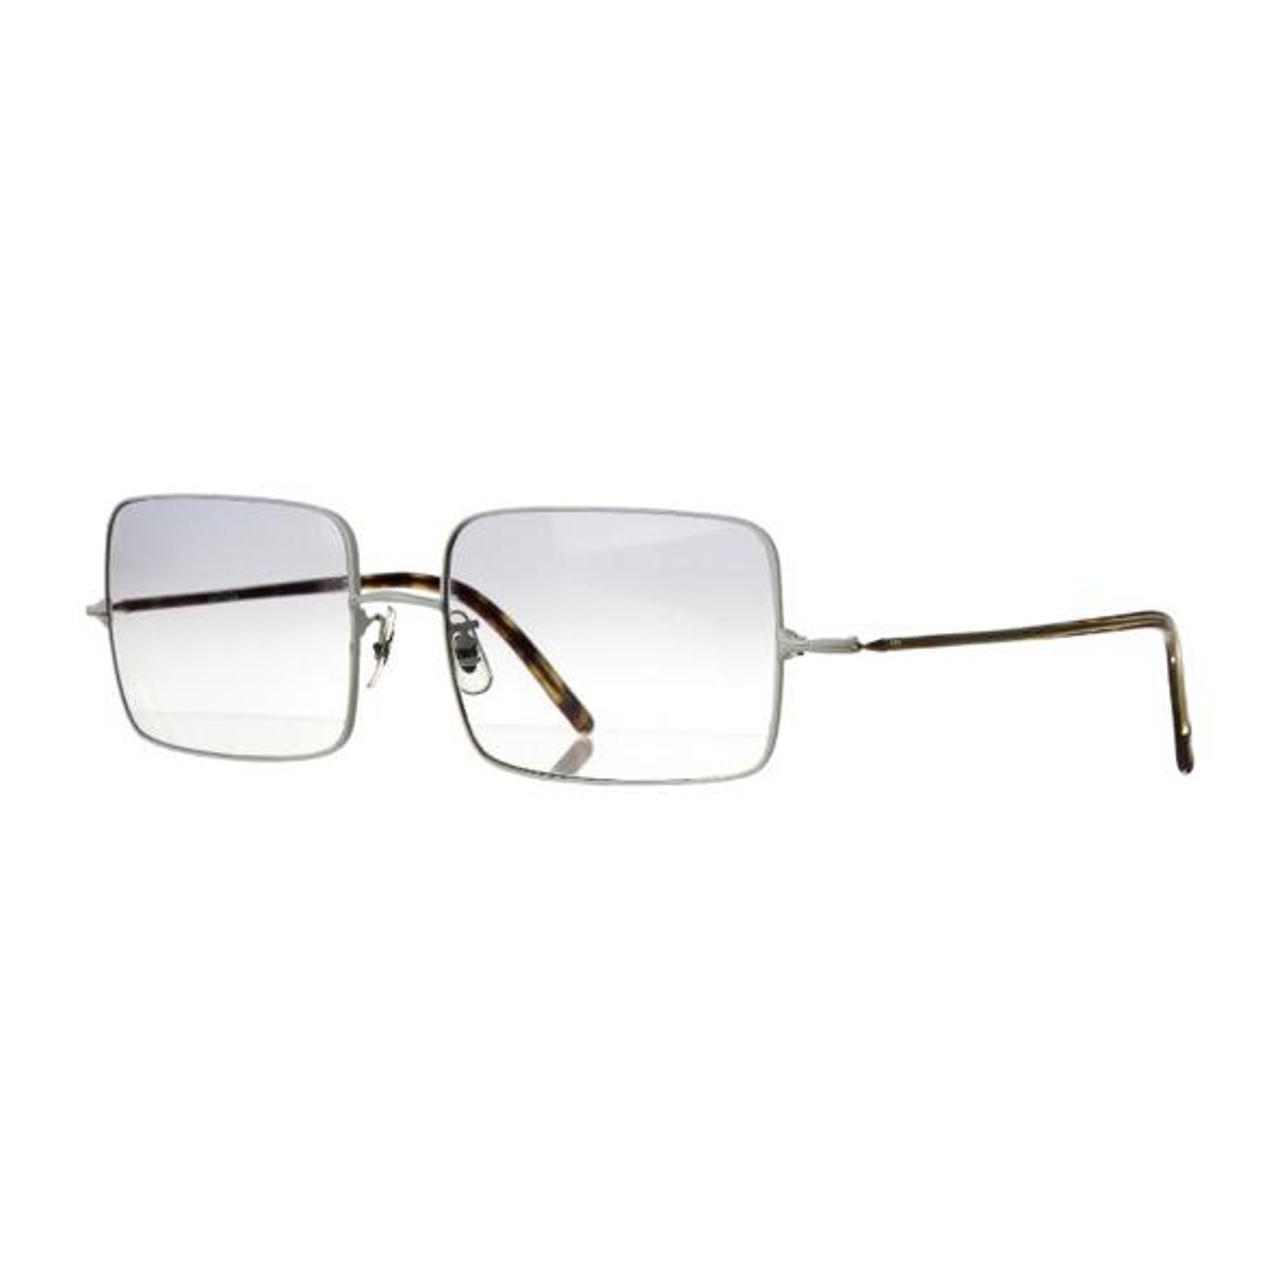 Oliver Peoples Women's Blue and White Sunglasses (2)